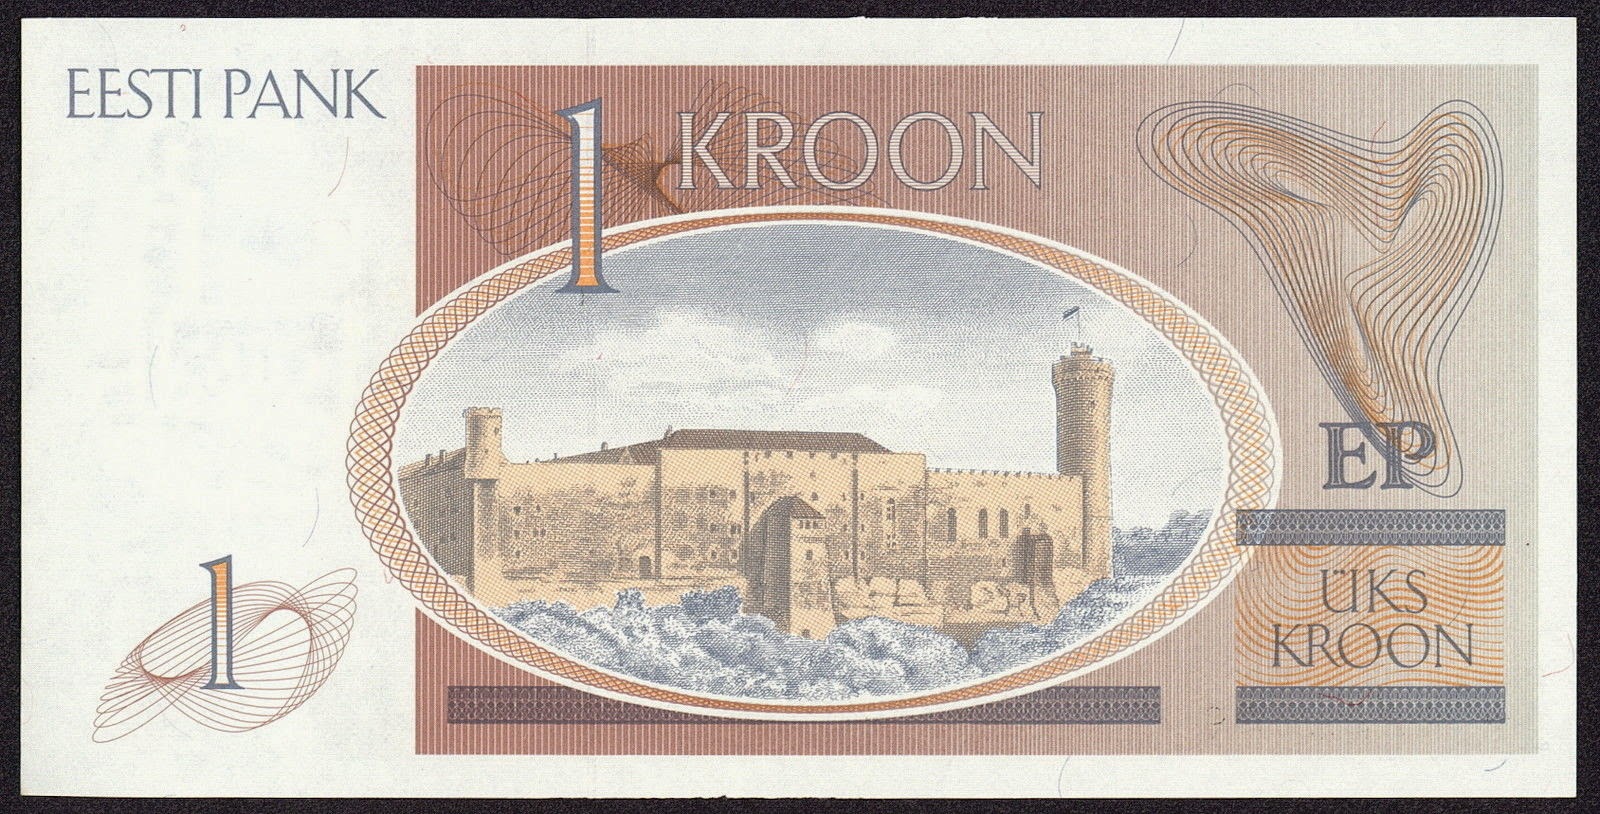 Estonia banknotes 1 kroon note, Toompea Castle and the Tall Hermann Tower